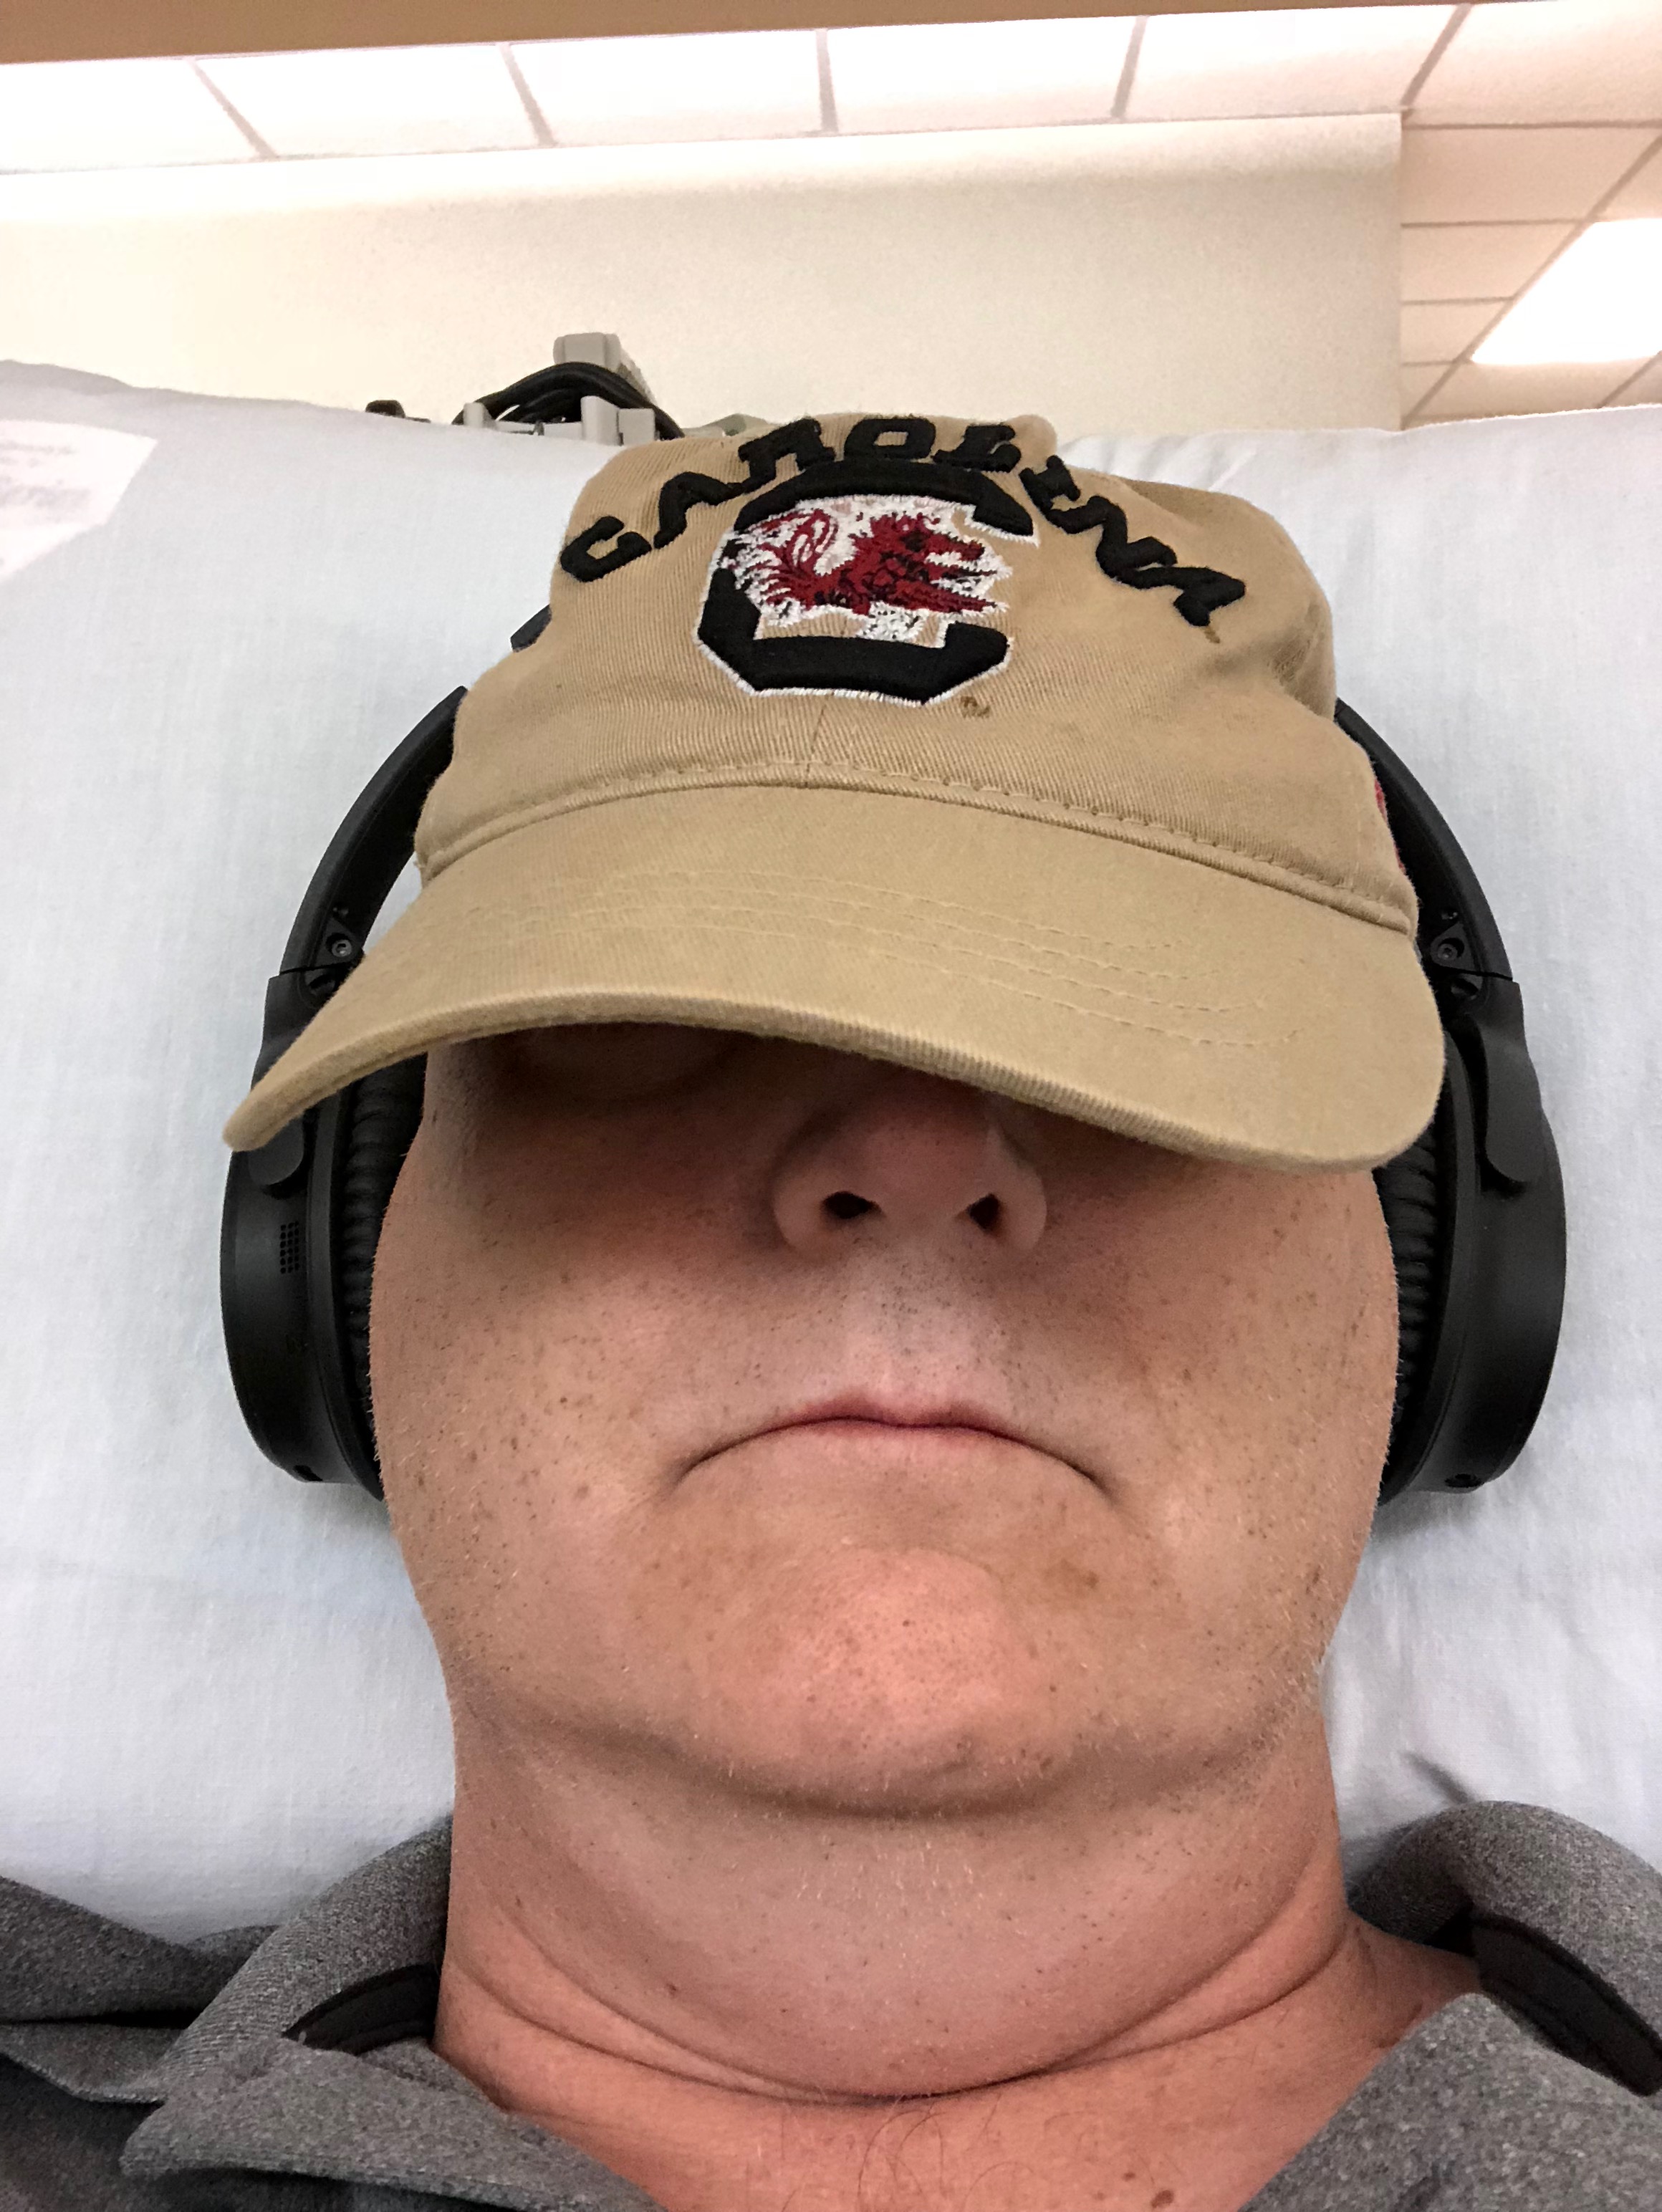 Me looking sexy in chemo.